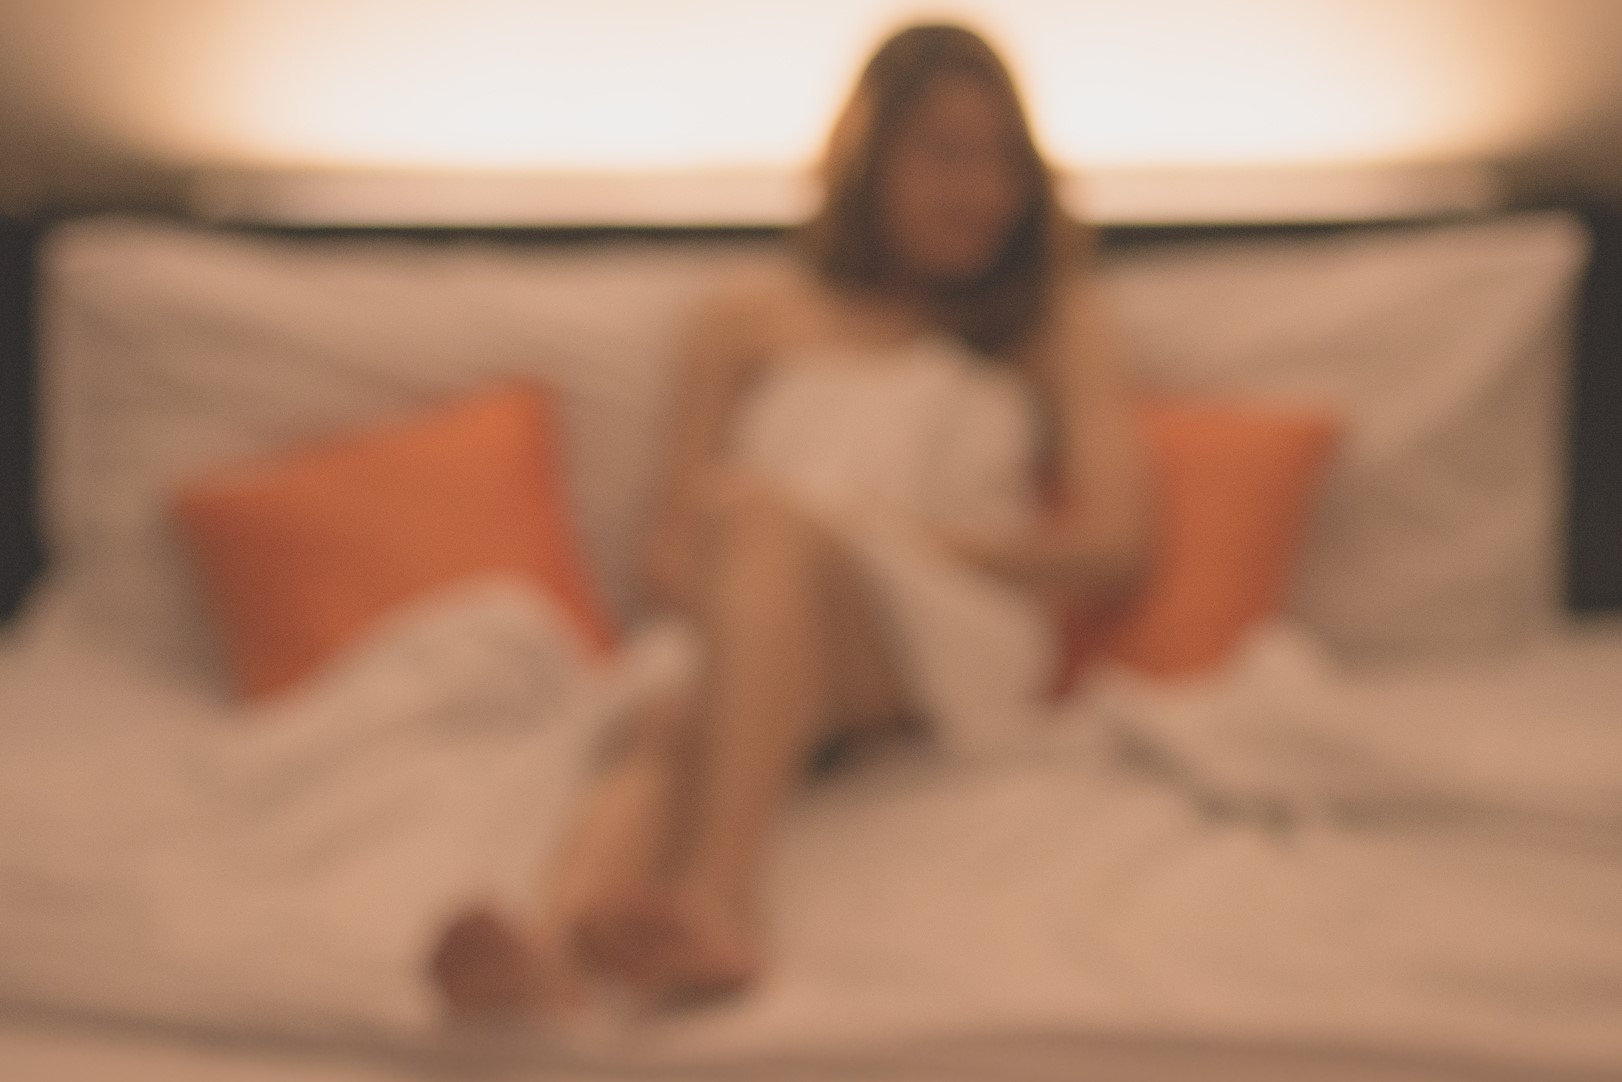 blurred image of woman on bed